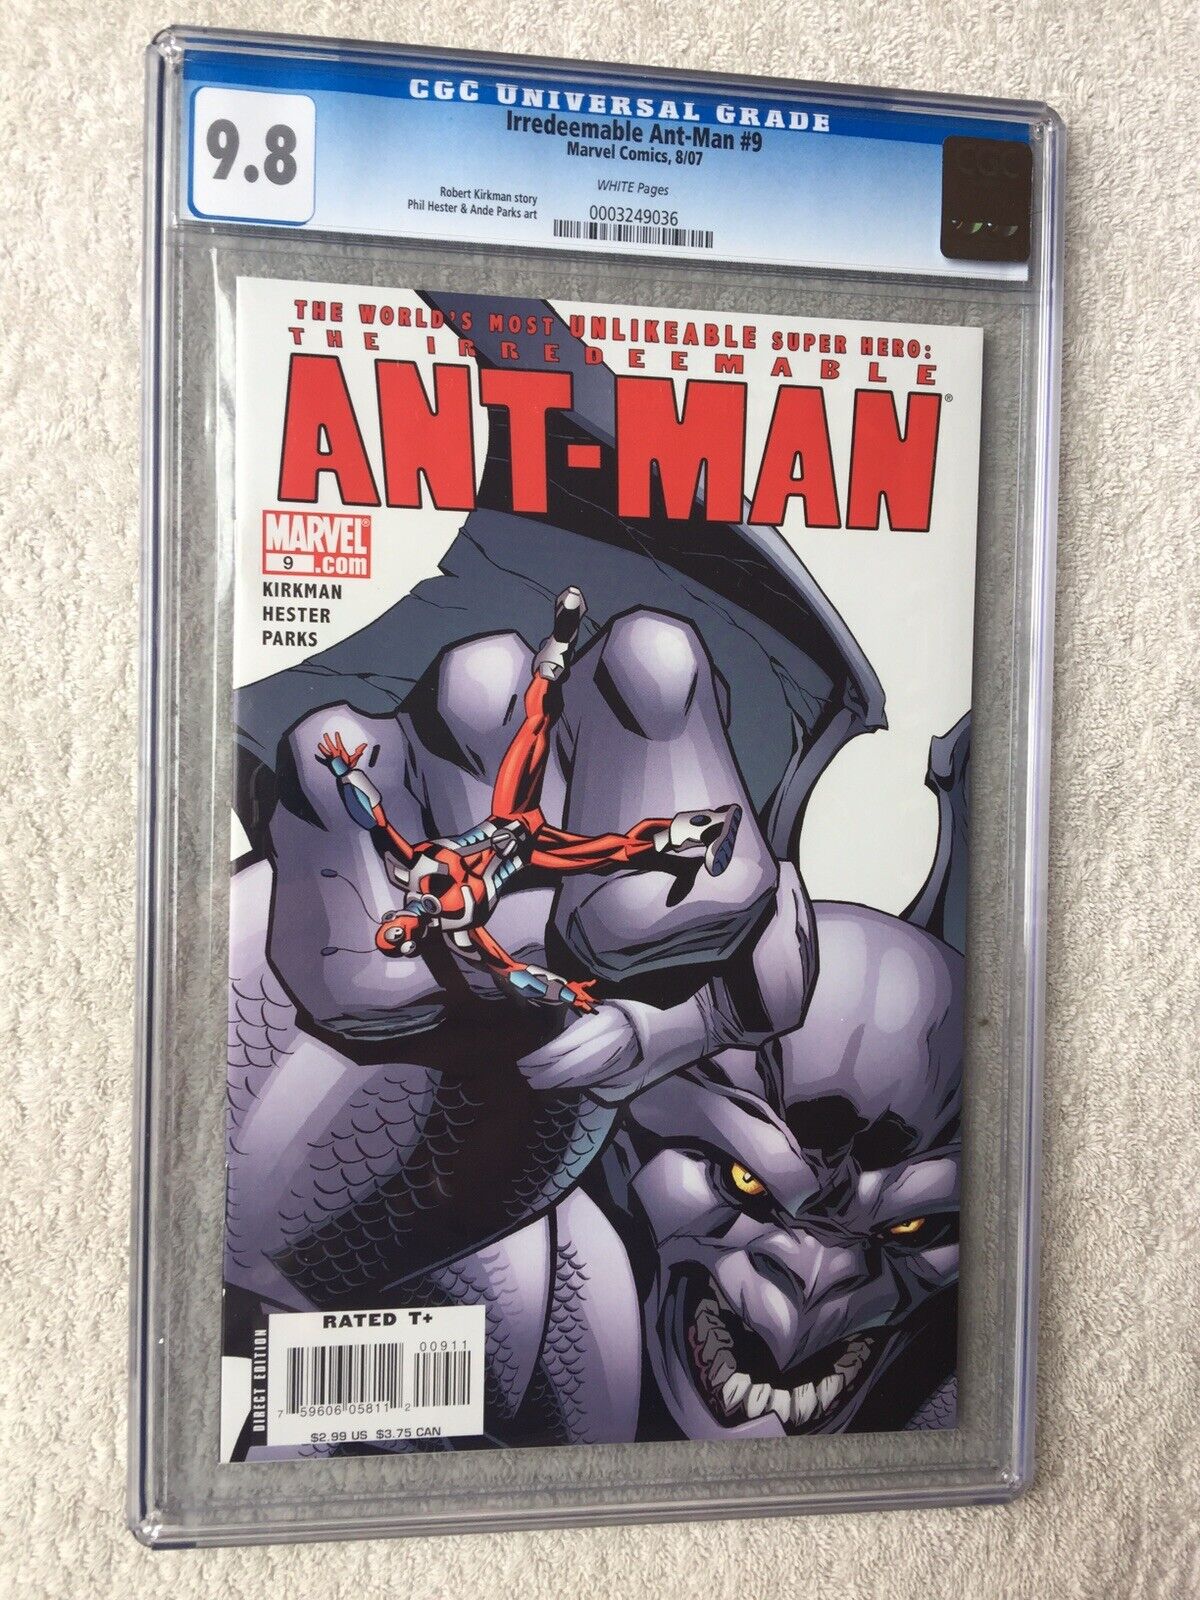 The Irredeemable Ant Man #9 Marvel August 2007 CGC 9.8 White Pages